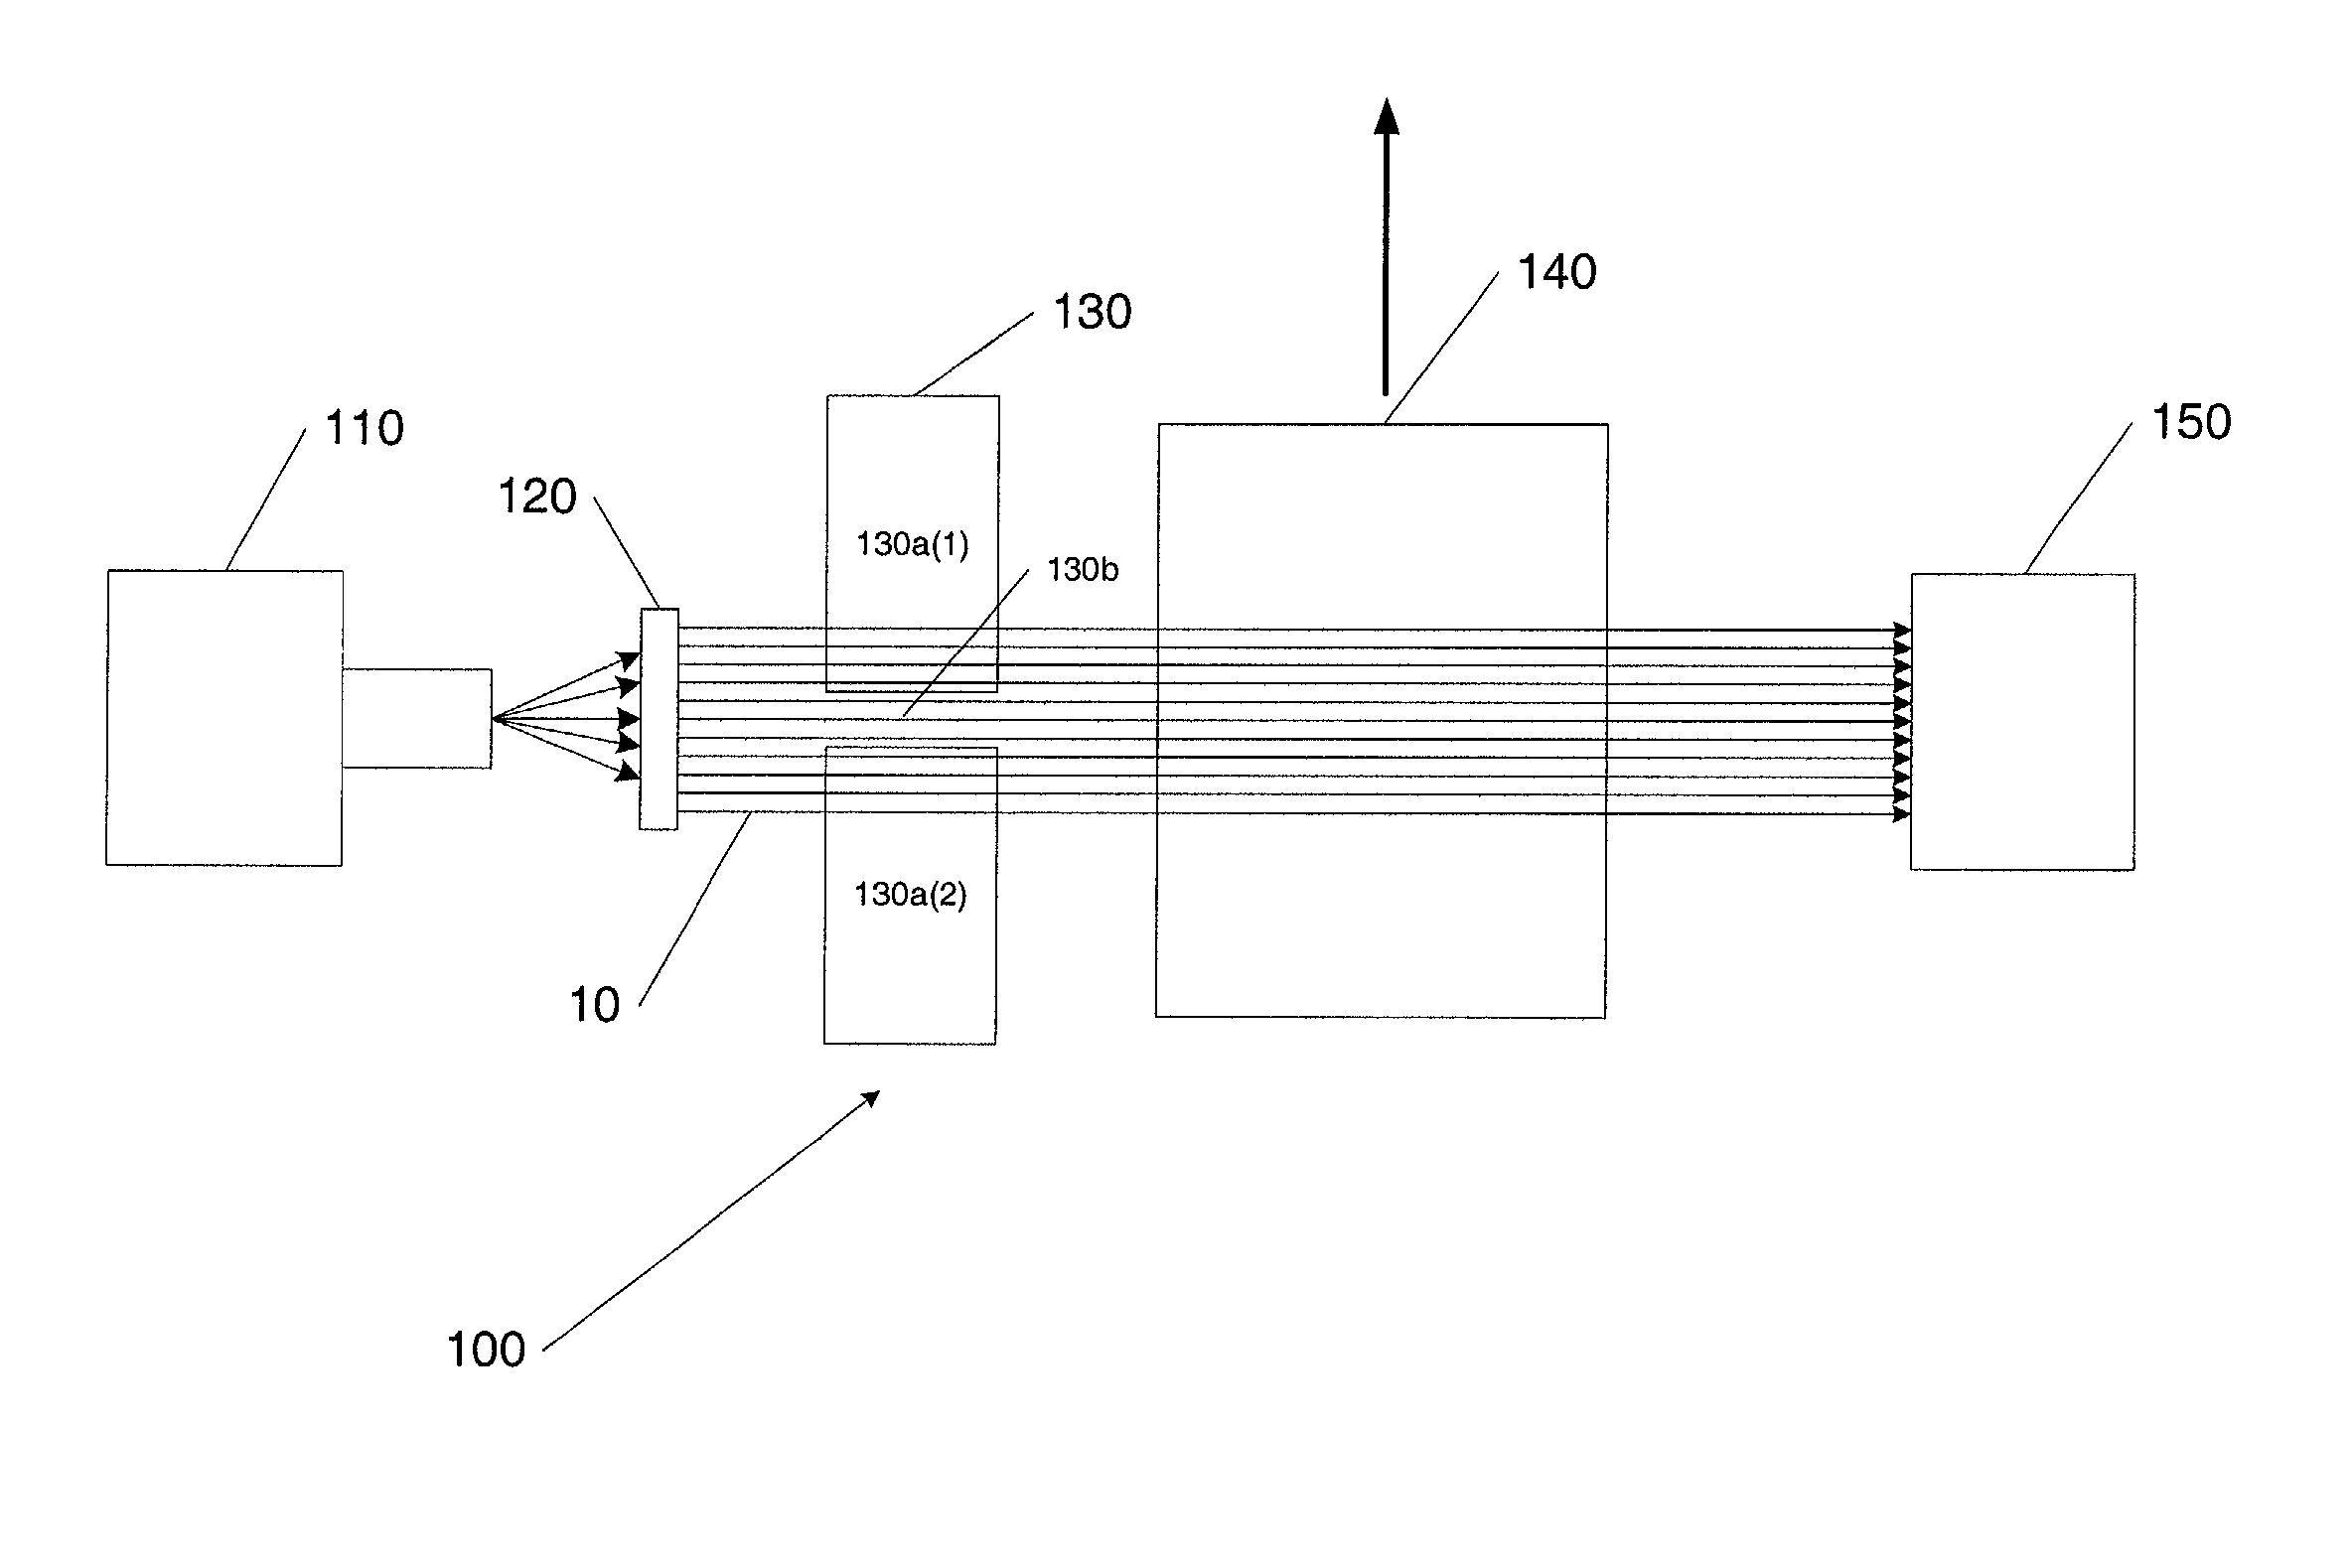 System and Method for inspecting an object using spatially and spectrally distinguished beams